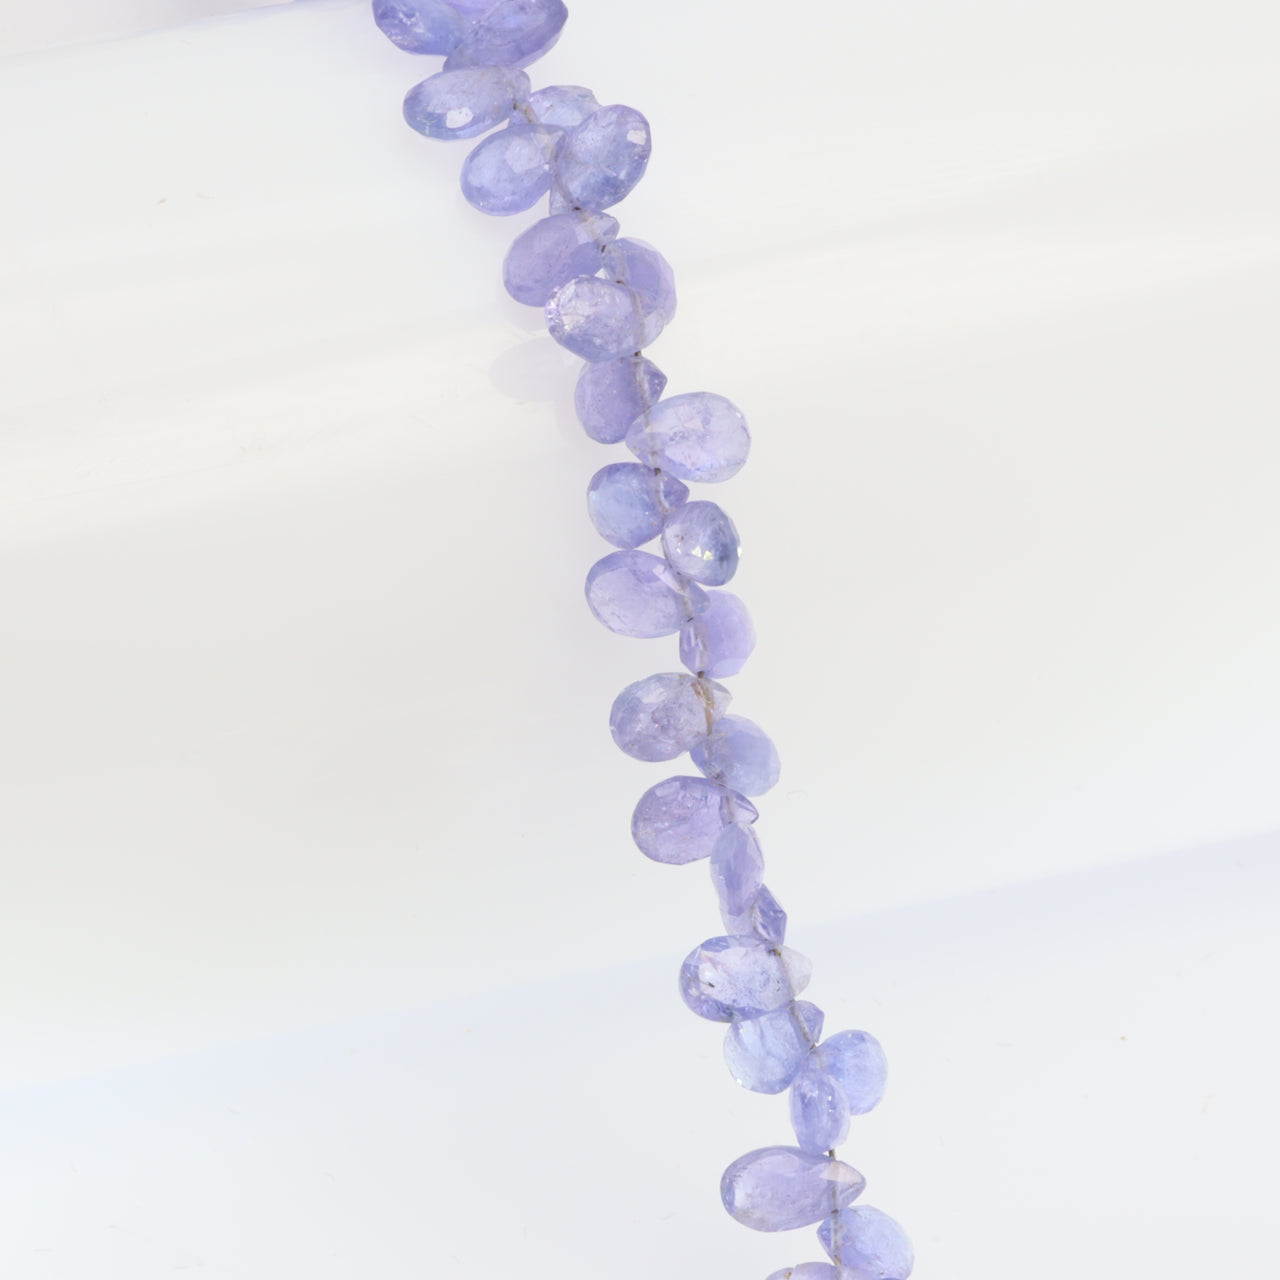 Blue Tanzanite 6x4mm Faceted Pear Shaped Briolettes